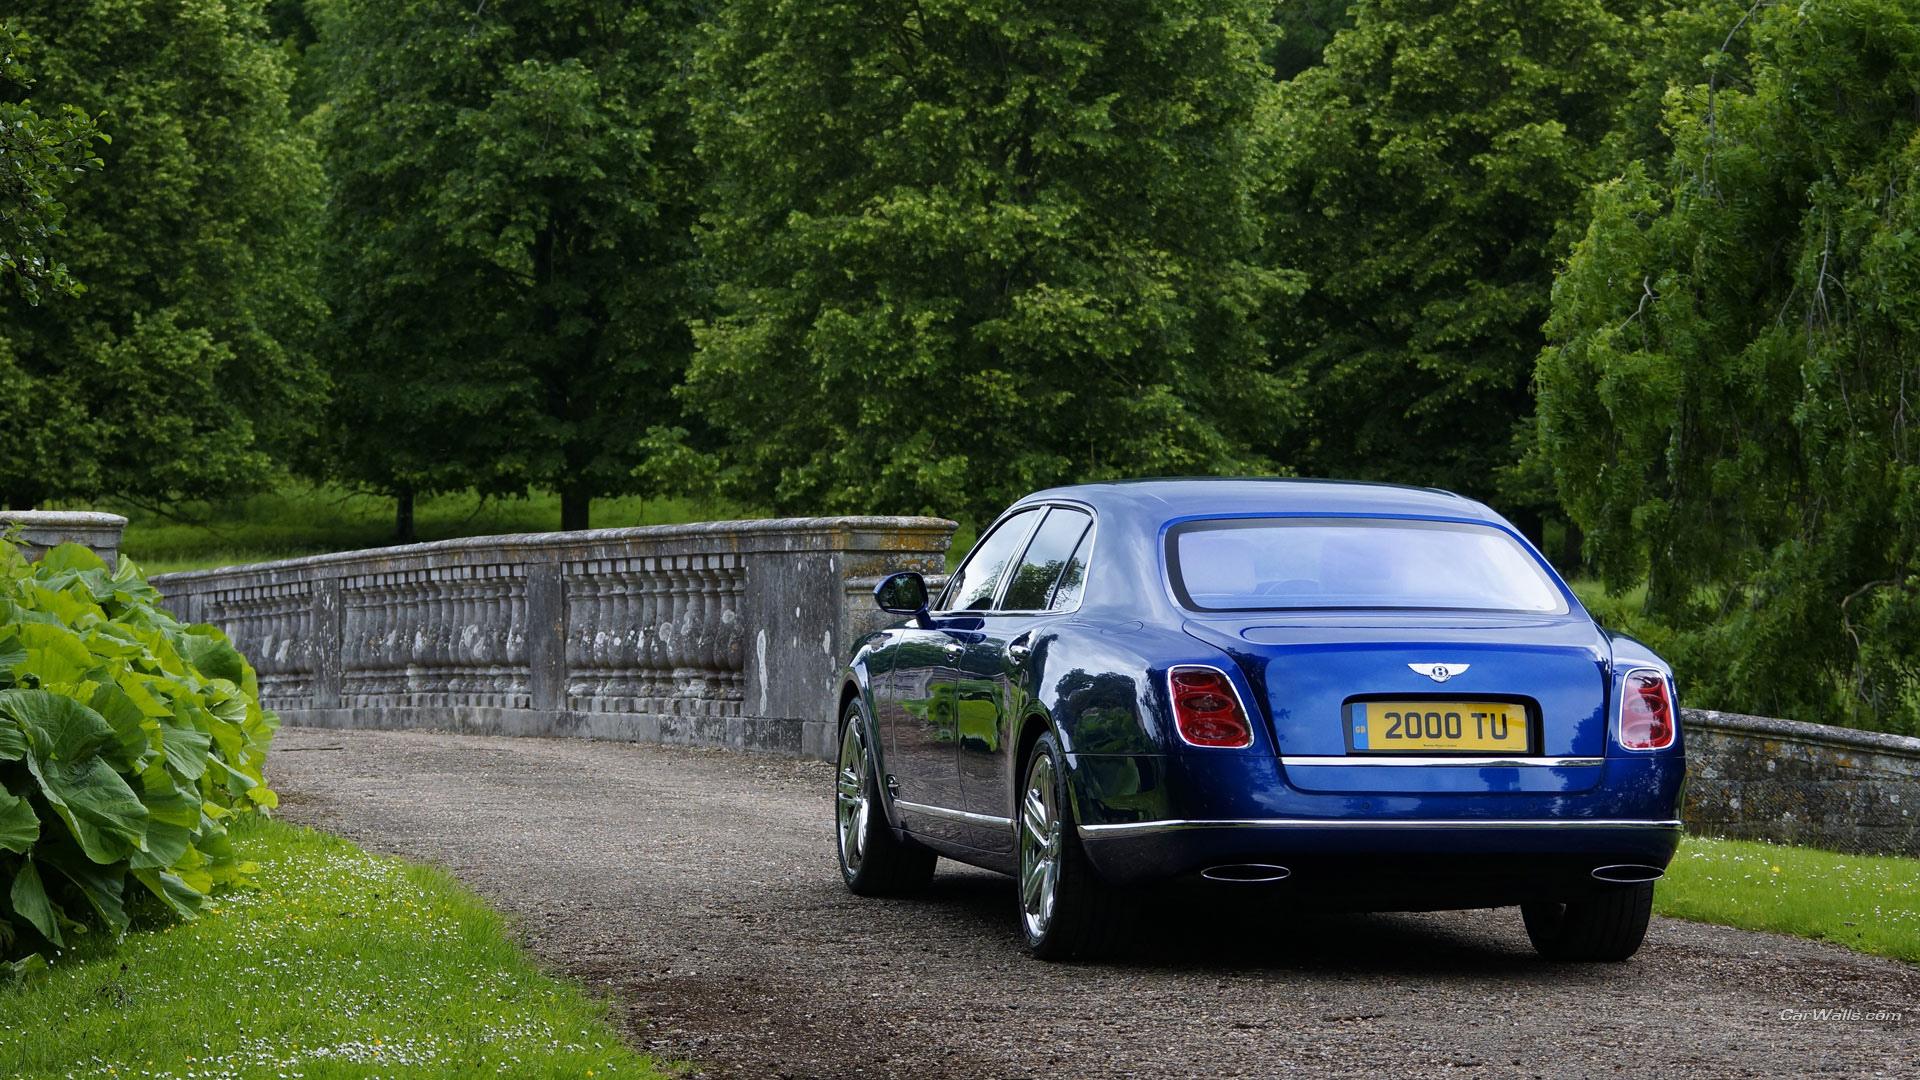 2013 Bentley Mulsanne wallpapers HD quality